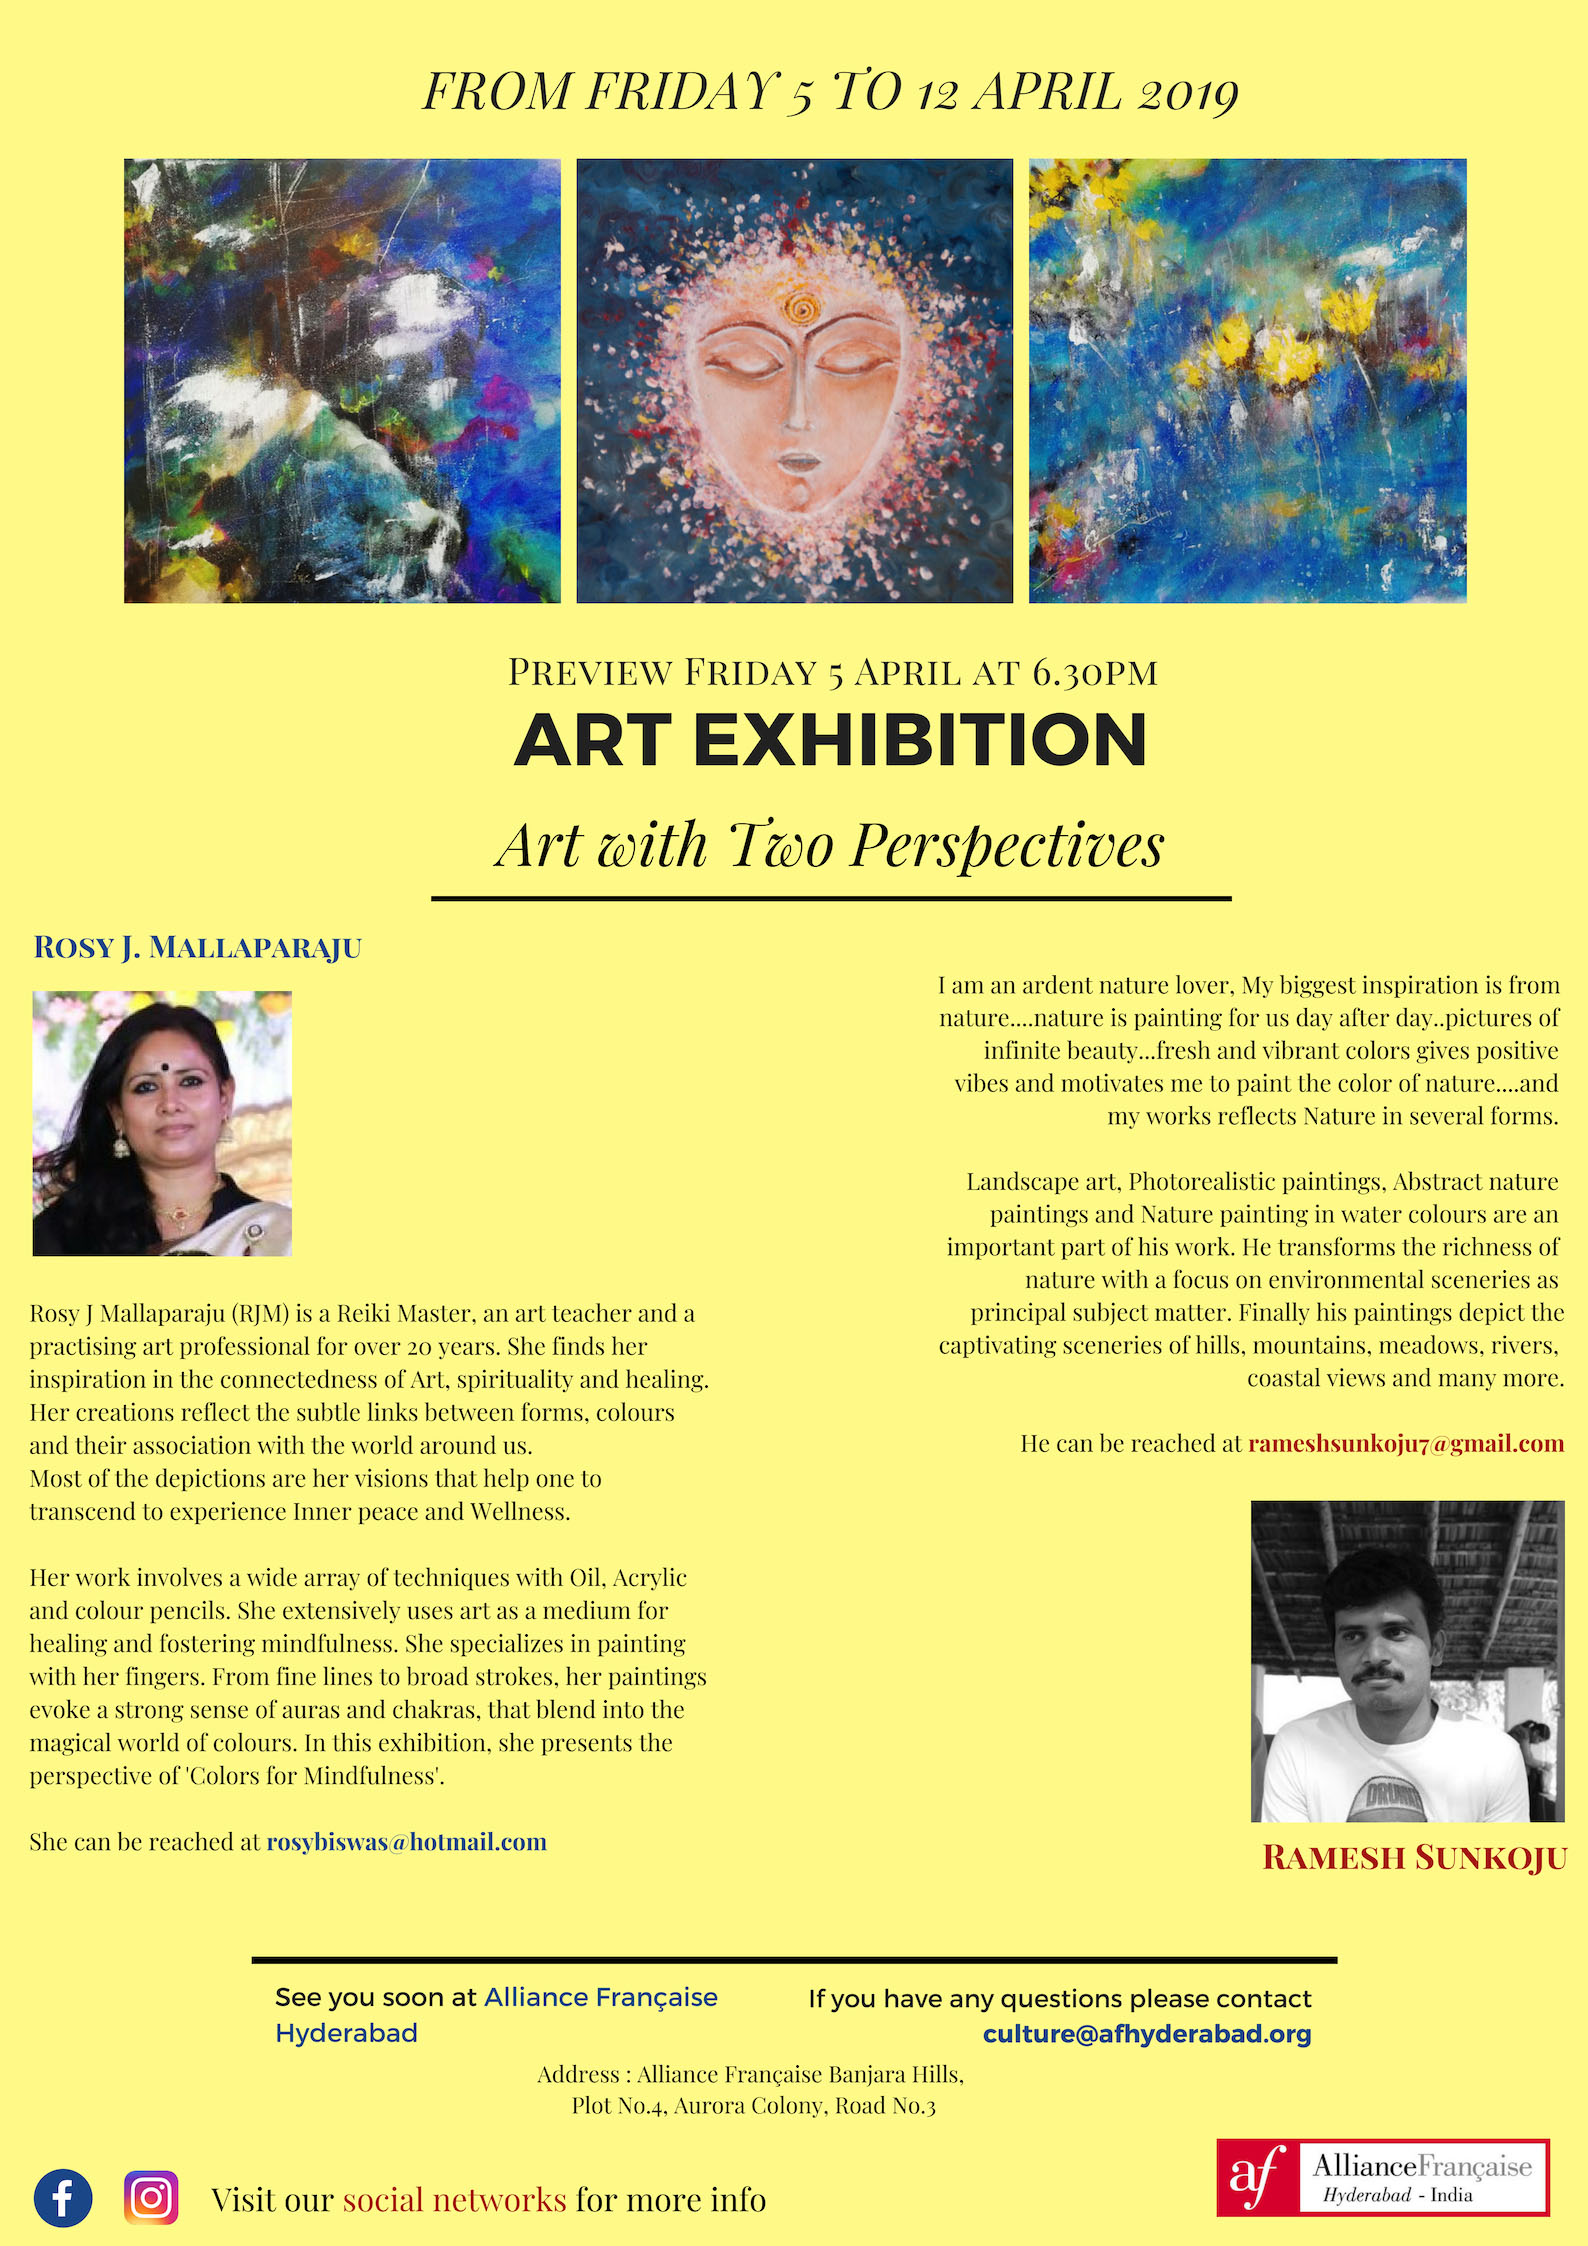 Art with 2 Perspectives -  Rosy & Ramesh - April 5th to 12th